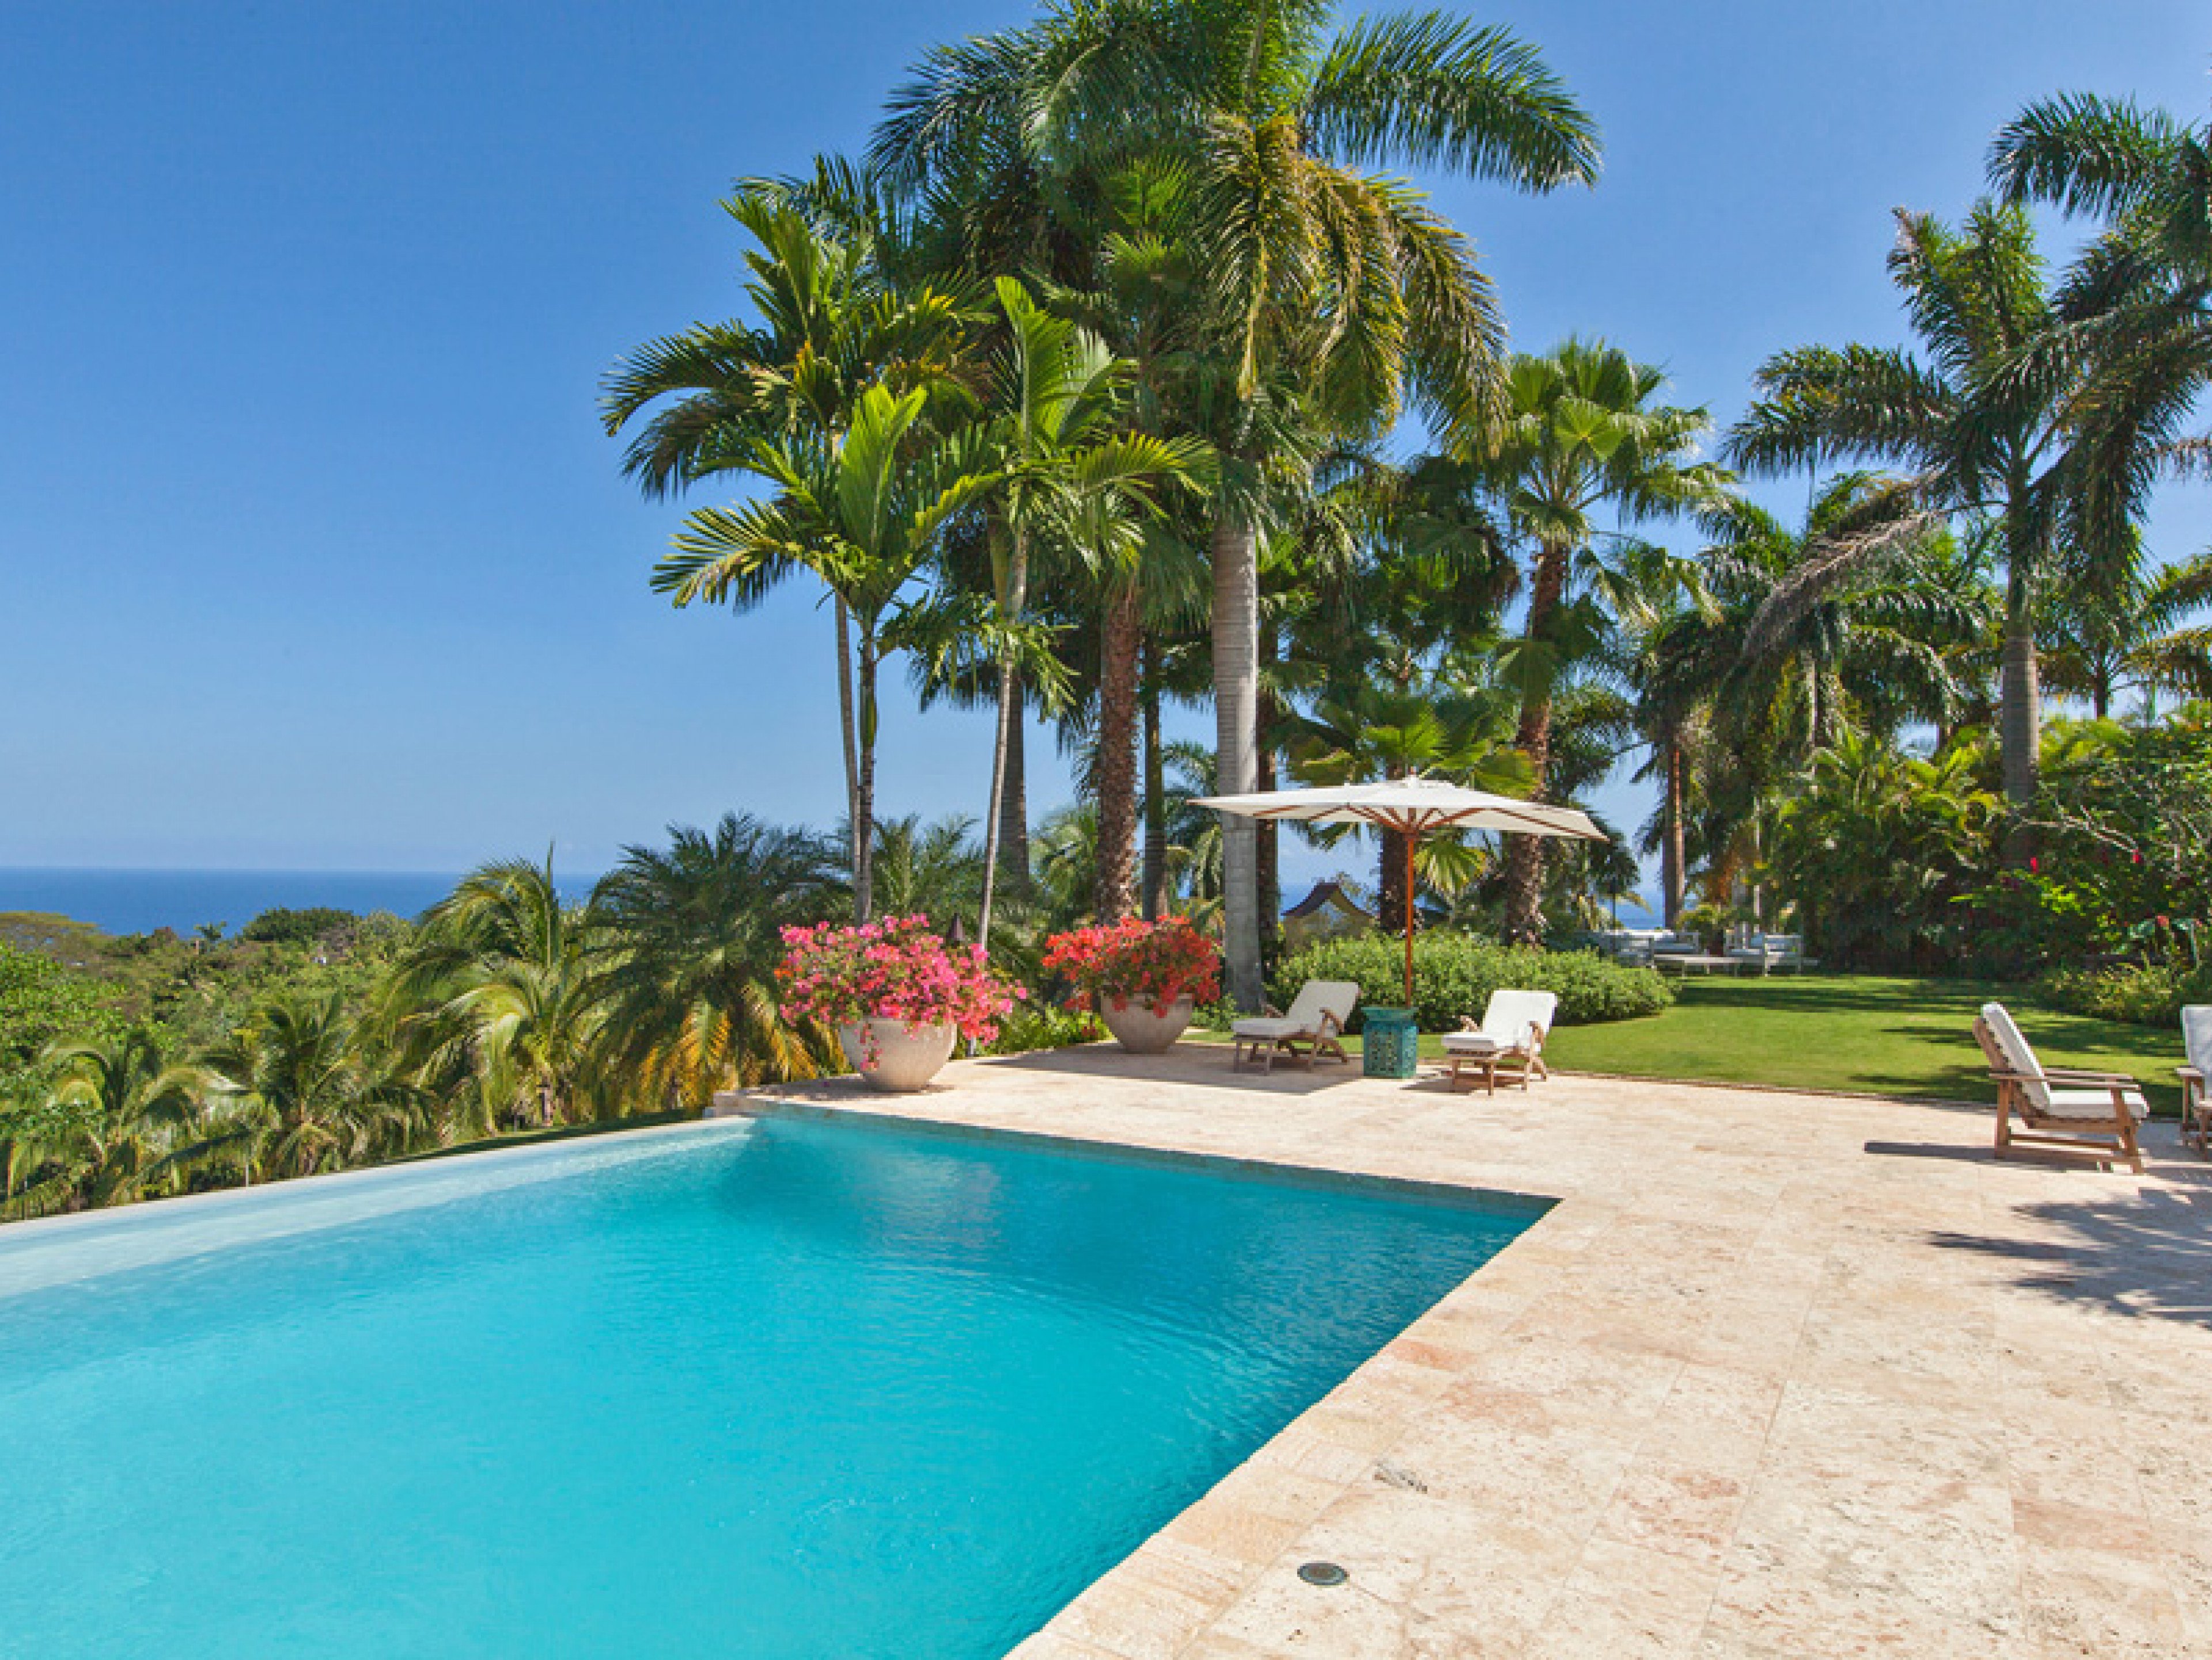 https://www.thetopvillas.com/destinations/caribbean/jamaica/montego-bay/tryall-club/point-of-view-at-the-tryall-club/